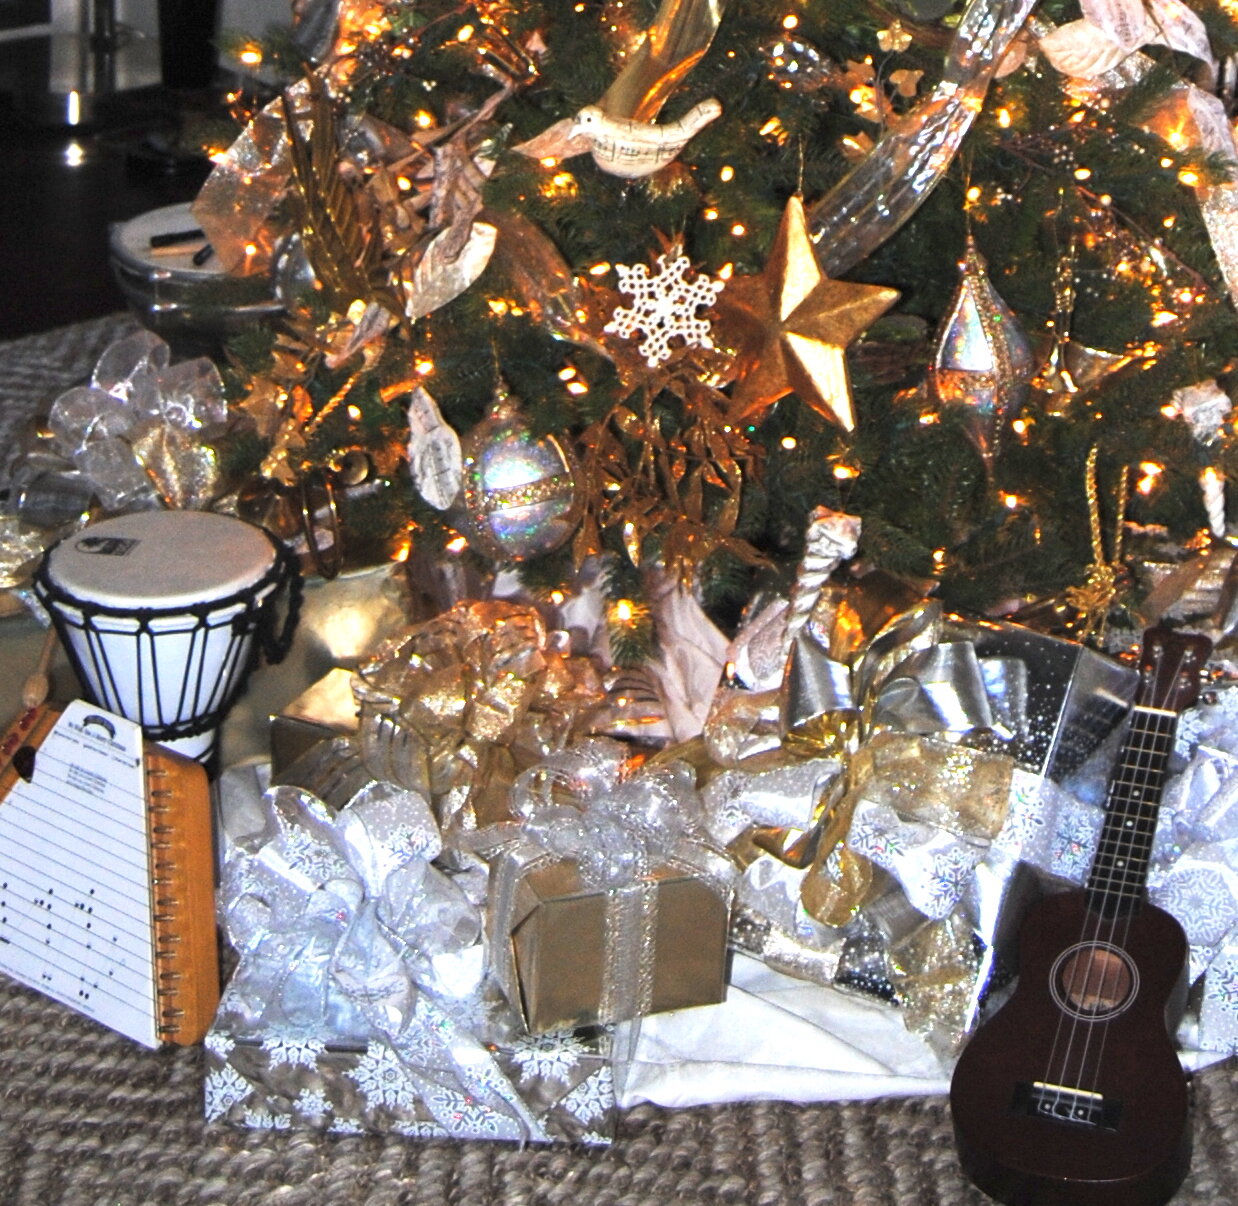 musical instruments and gold and silver packages beneath the tree.jpg